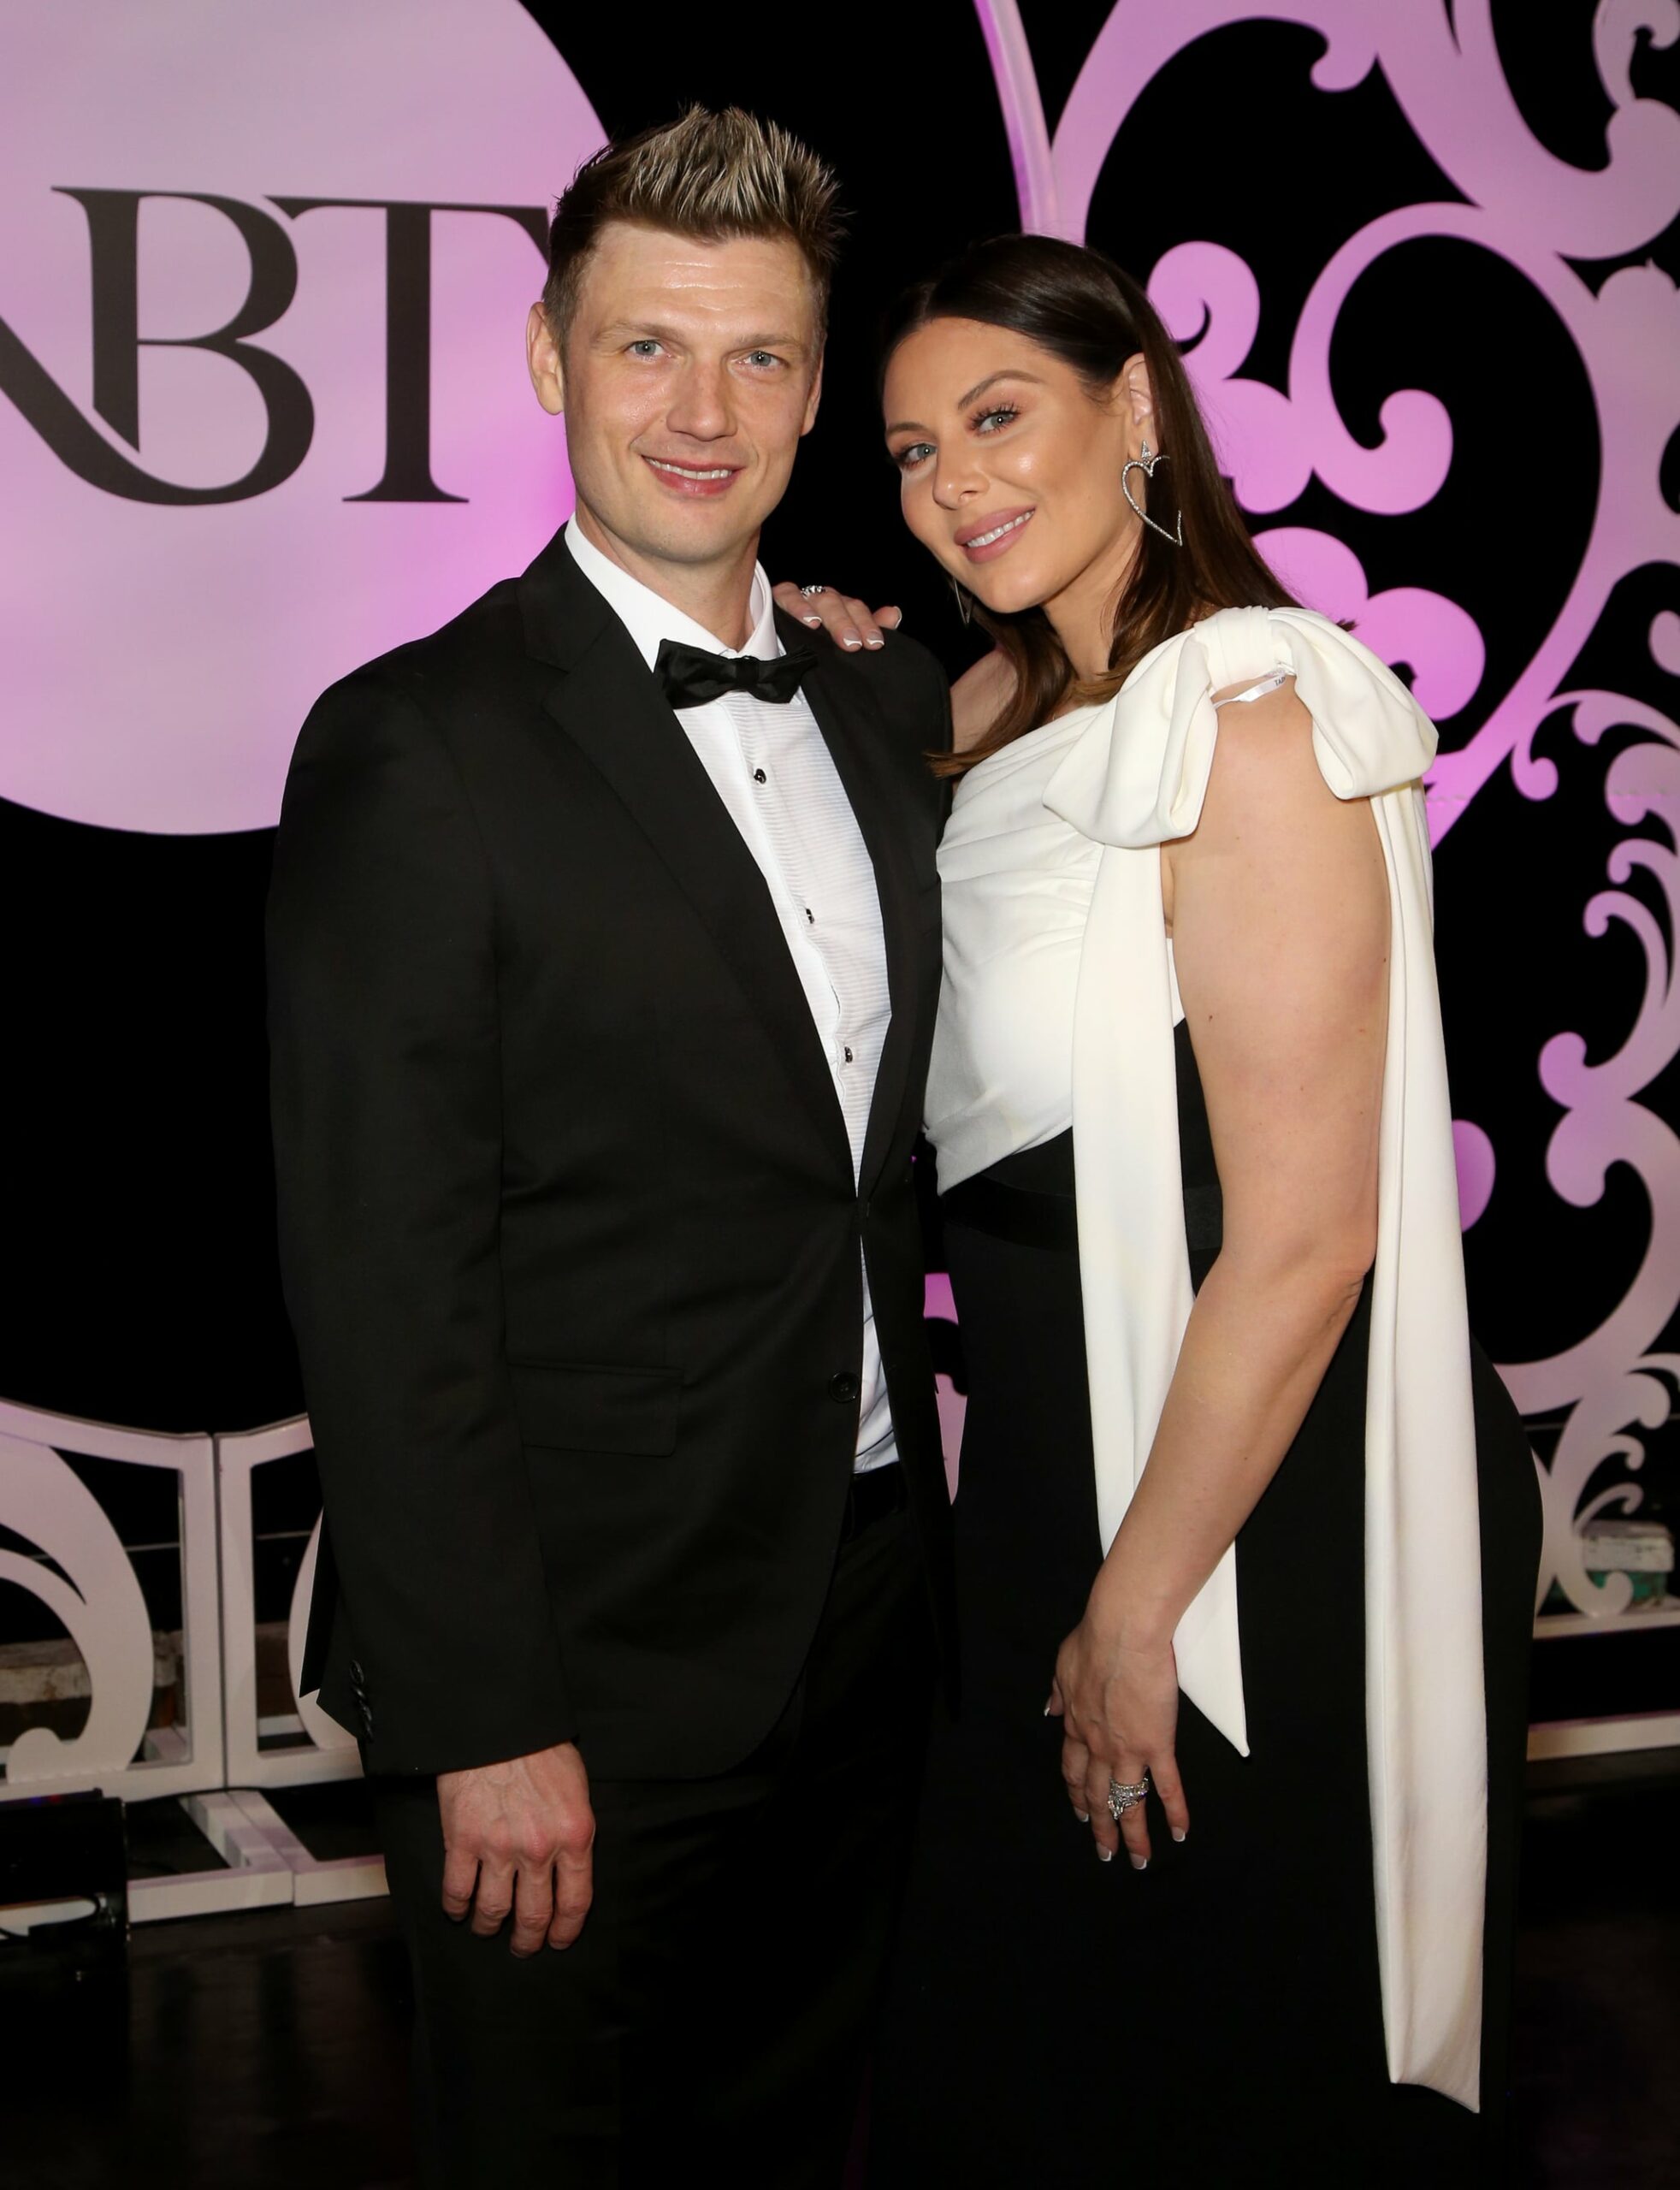 LAS VEGAS, NEVADA - JANUARY 25:  Singer Nick Carter (L) of Backstreet Boys and his wife Lauren Carter attend the 36th annual Black and White Ball honoring Nevada Ballet Theatre's 2020 Woman of the Year event at Caesars Palace on January 25, 2020 in Las Vegas, Nevada. (Photo by Gabe Ginsberg/Getty Images)